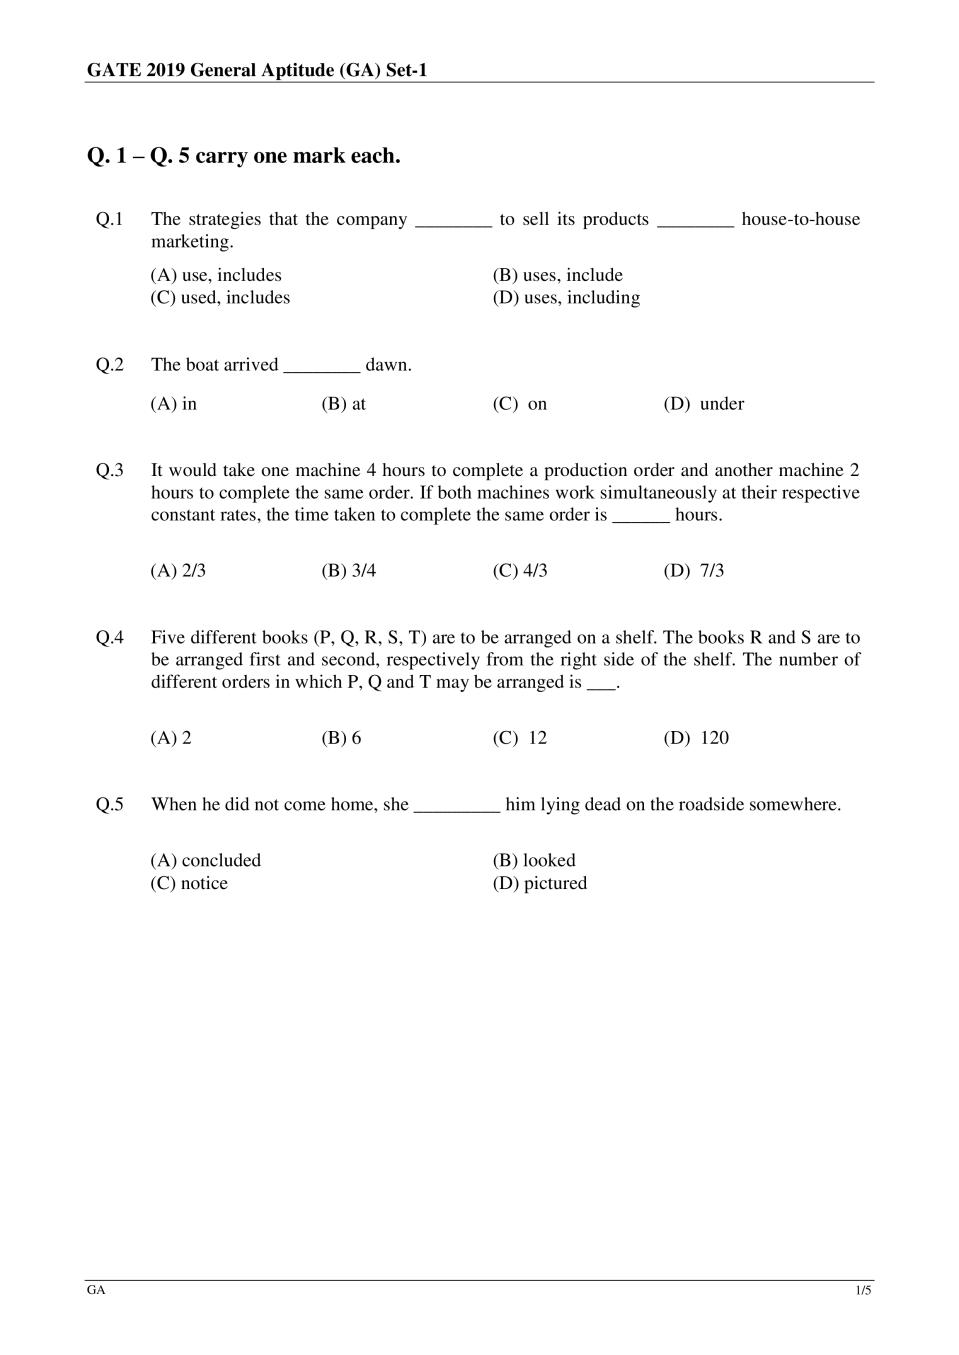 GATE 2019 Electronics and Communication Engineering (EC) Question Paper with Answer - Page 1